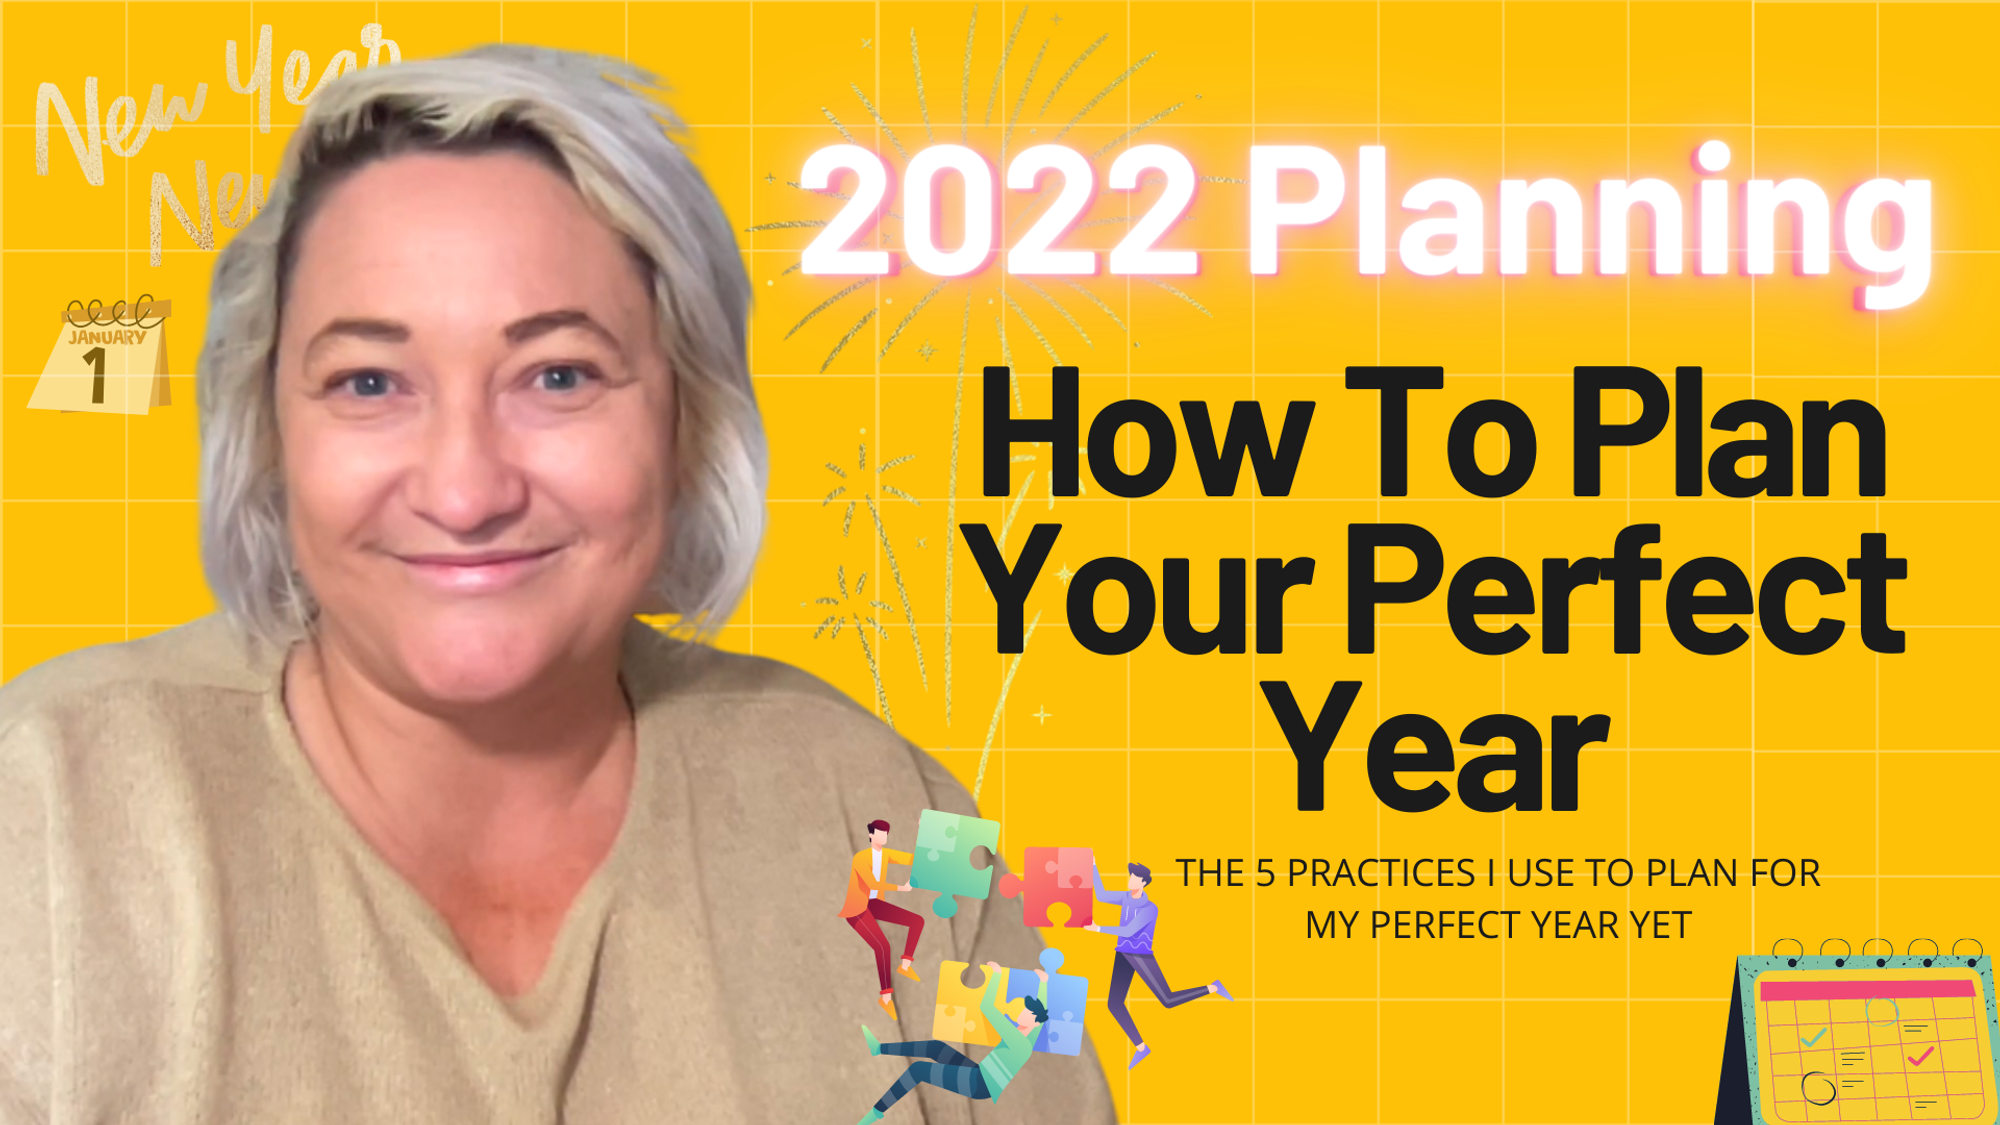 [VIDEO] Create Your Perfect Year In 2022